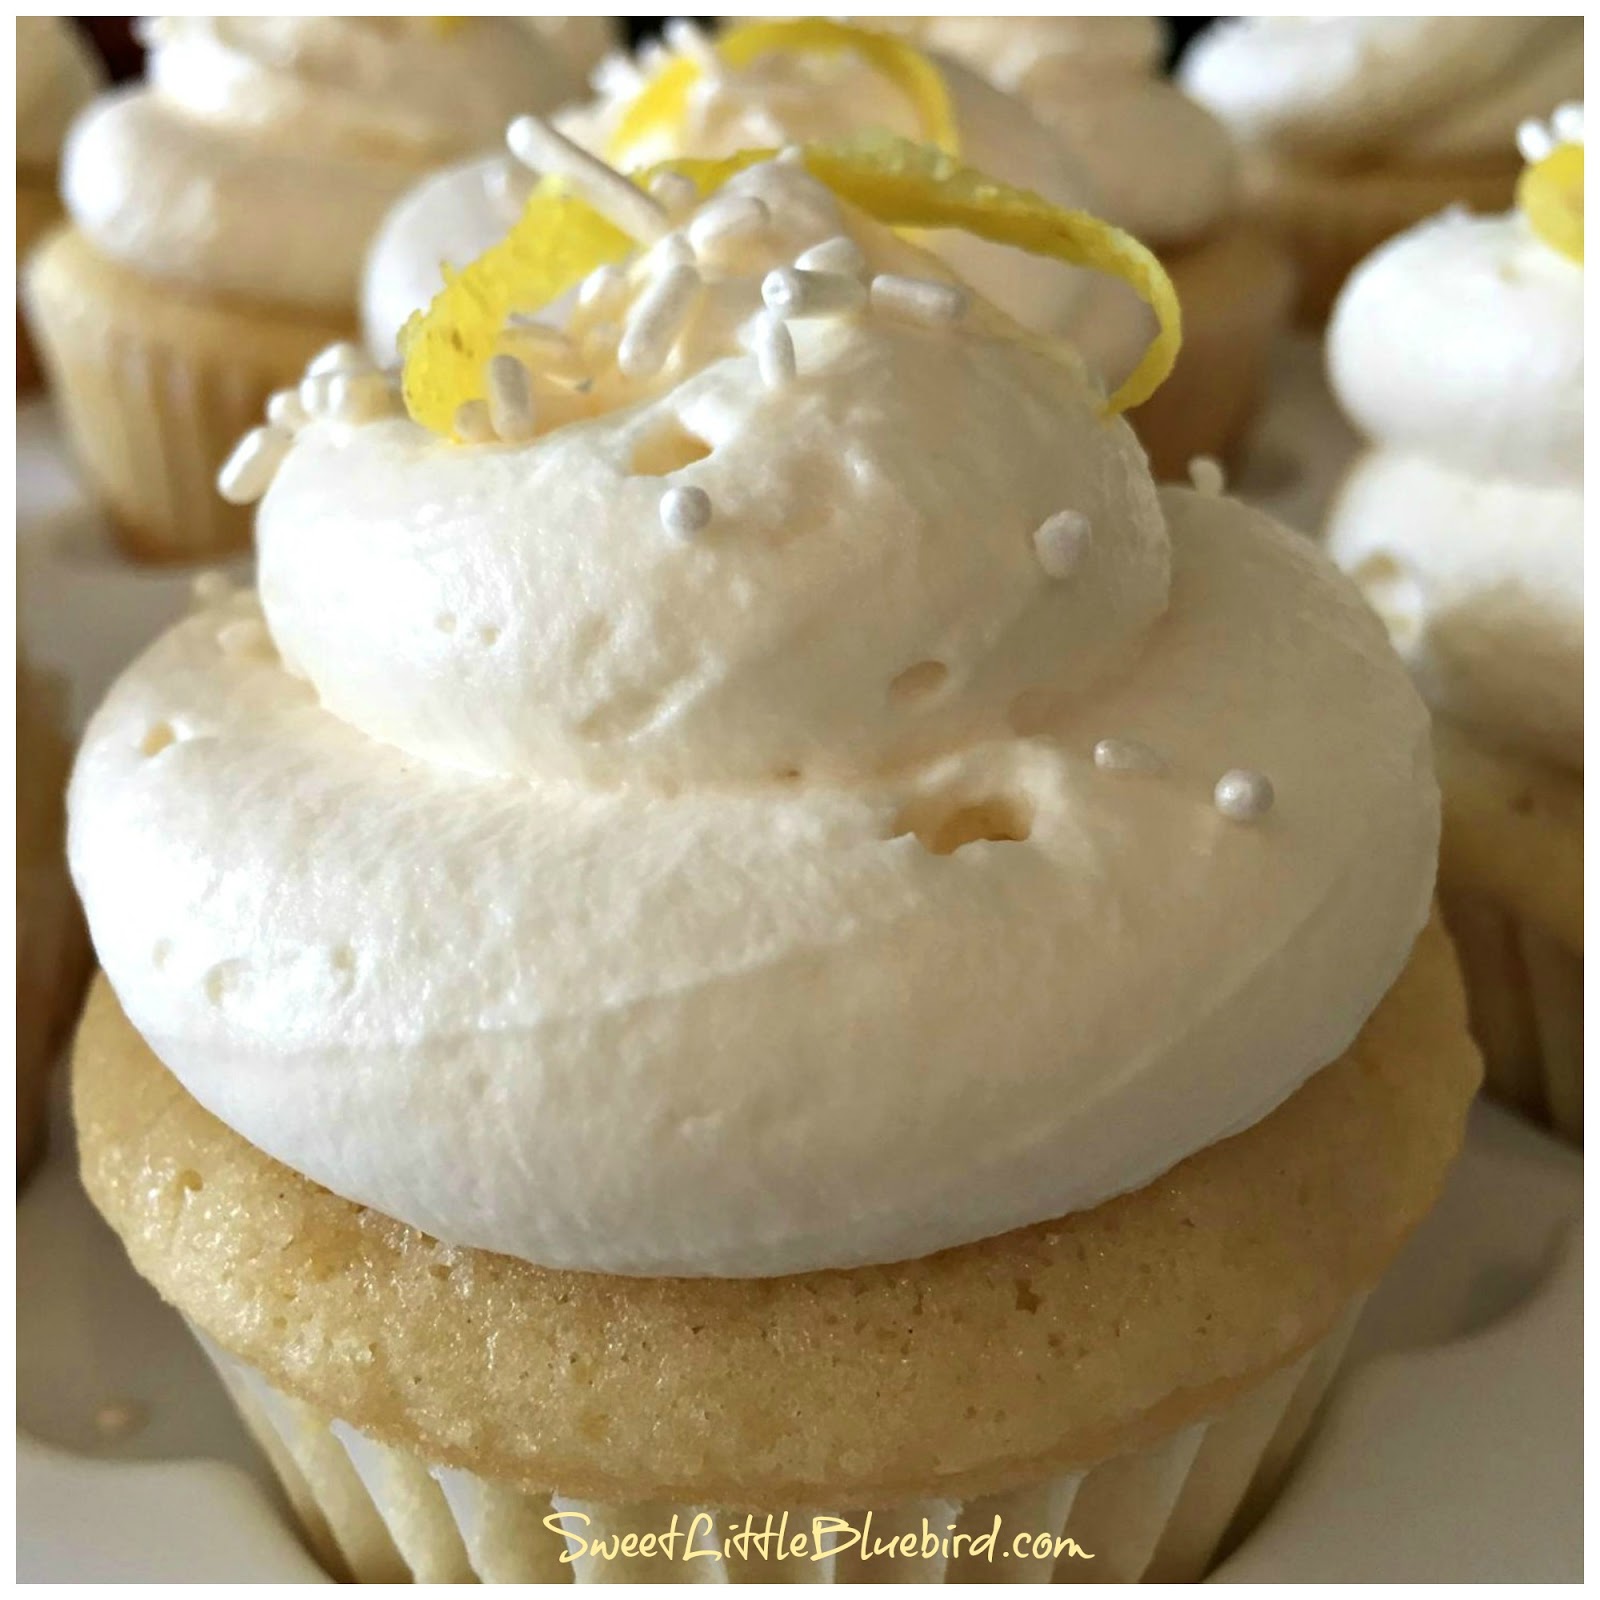 Lemon Cupcakes with Whipped Cream Frosting